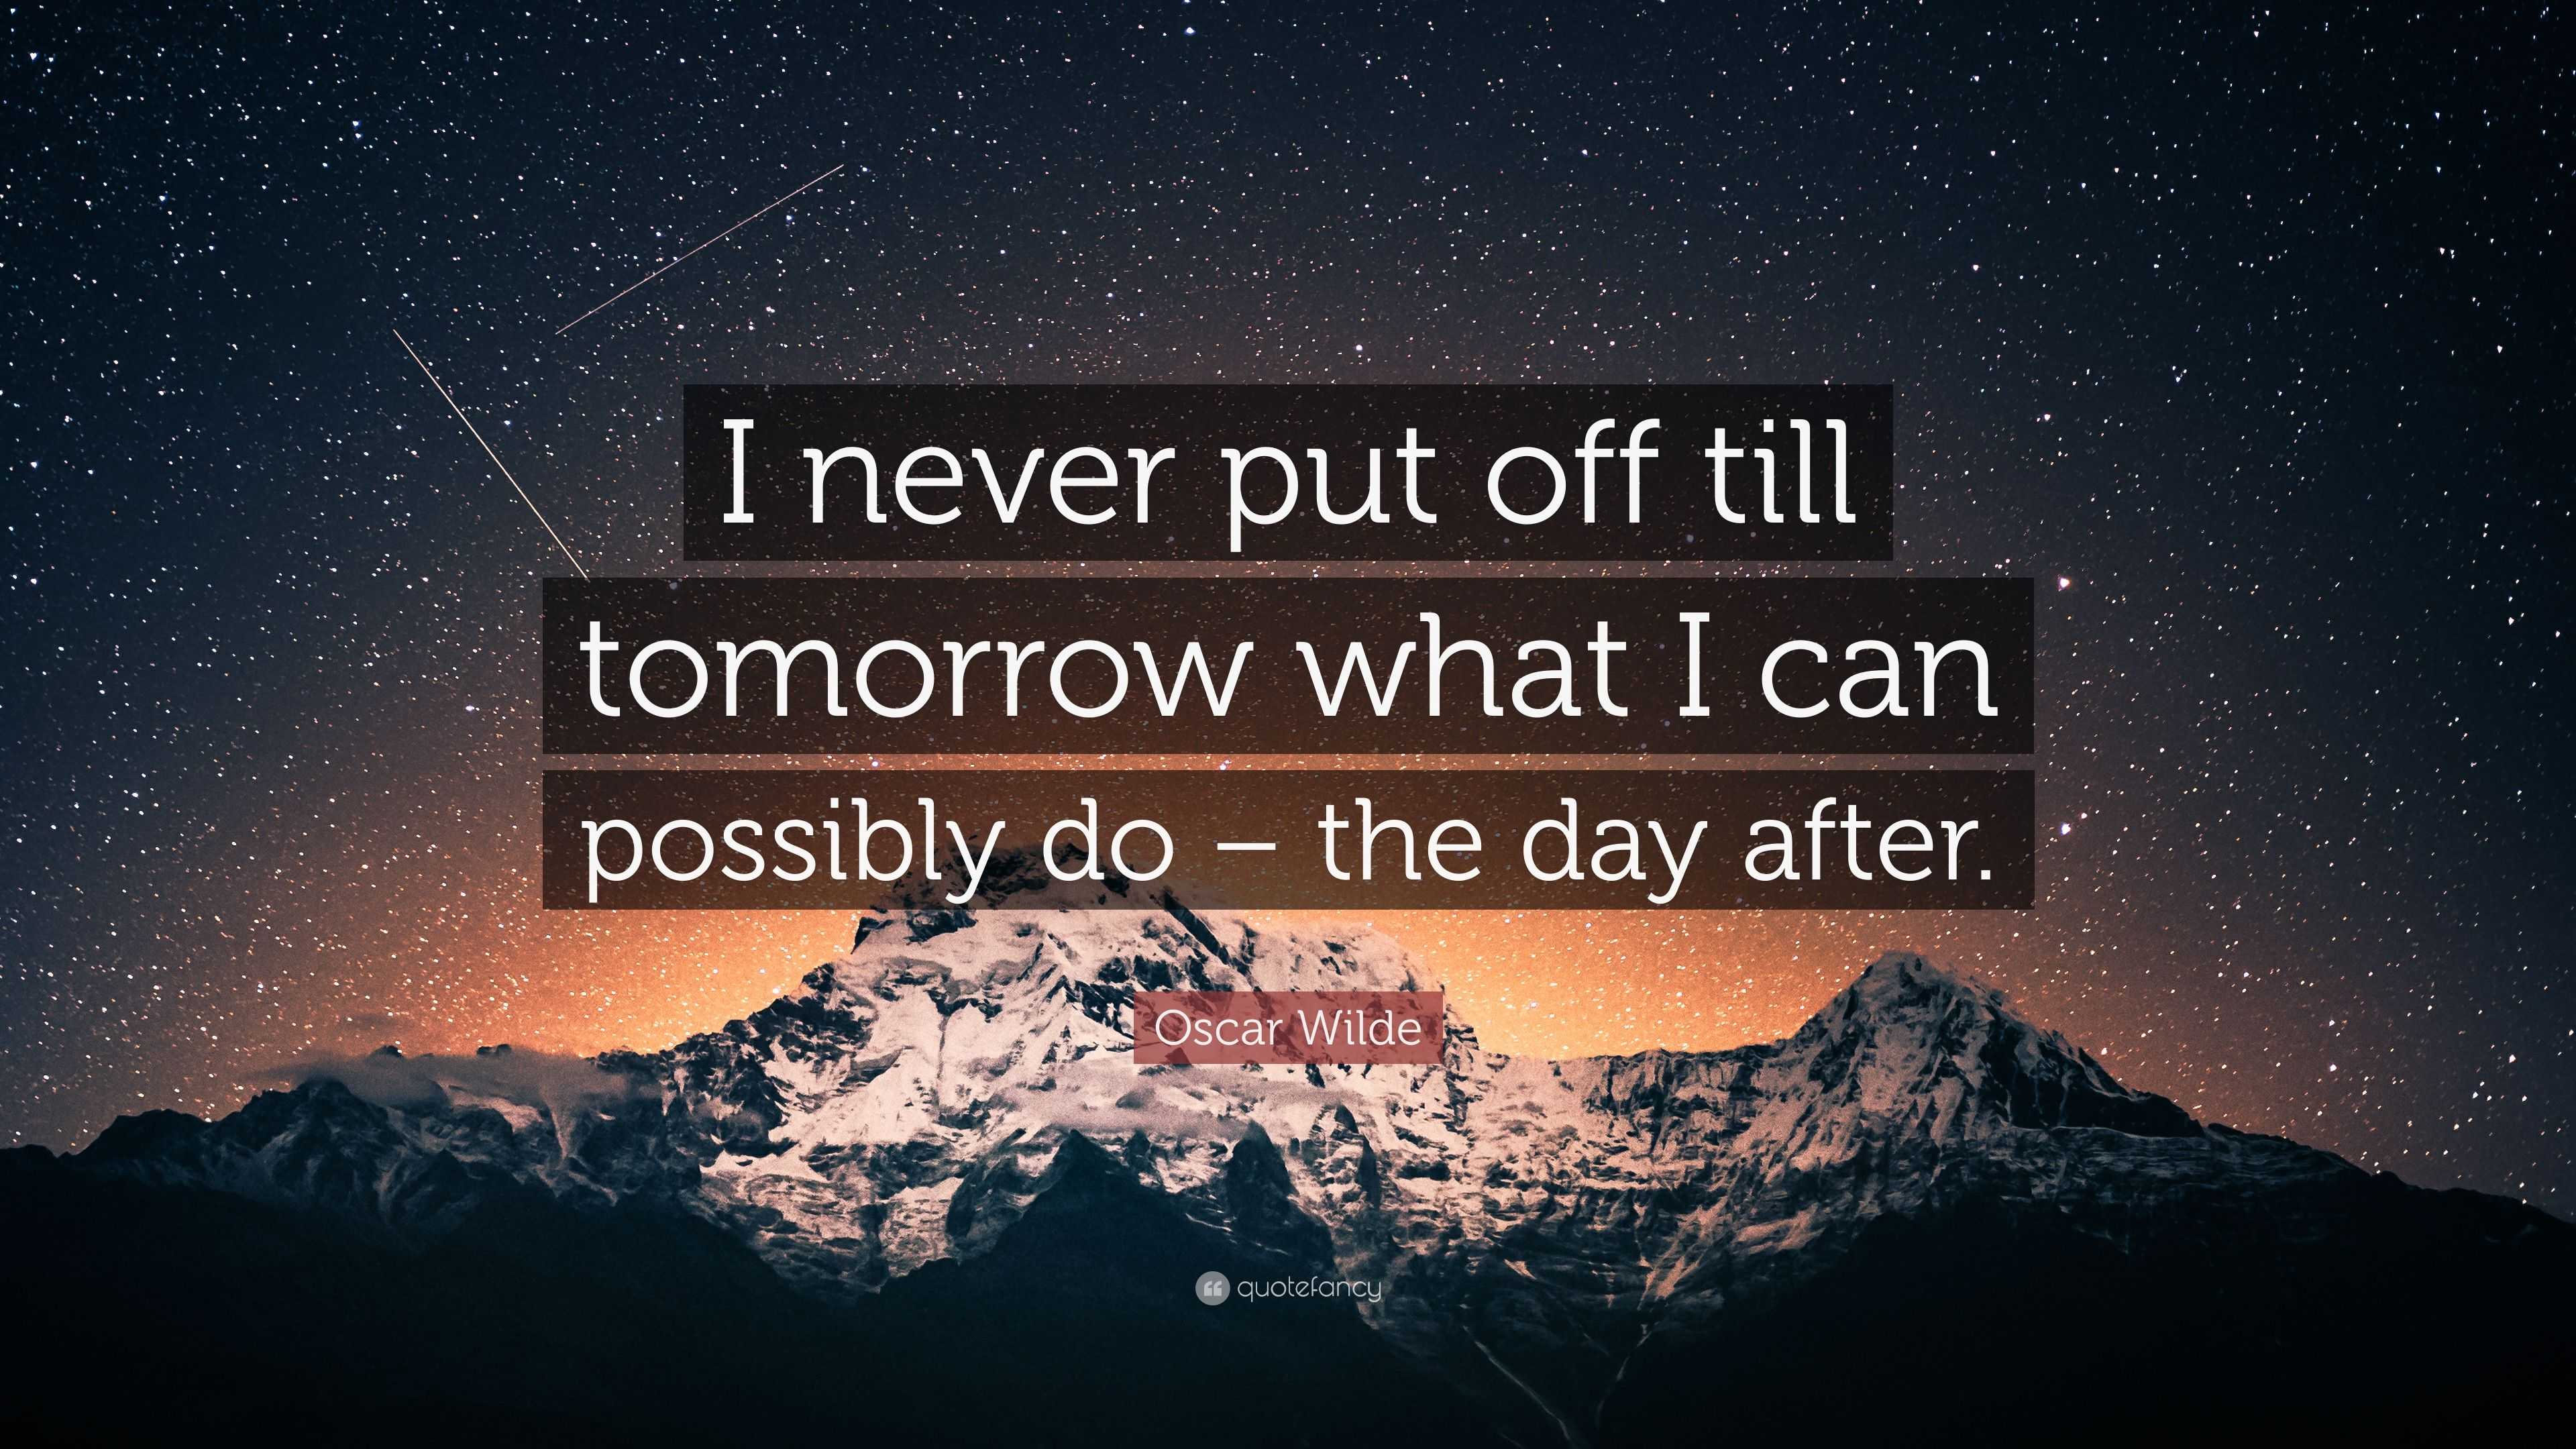 Oscar Wilde Quote: “I never put off till tomorrow what I can possibly ...